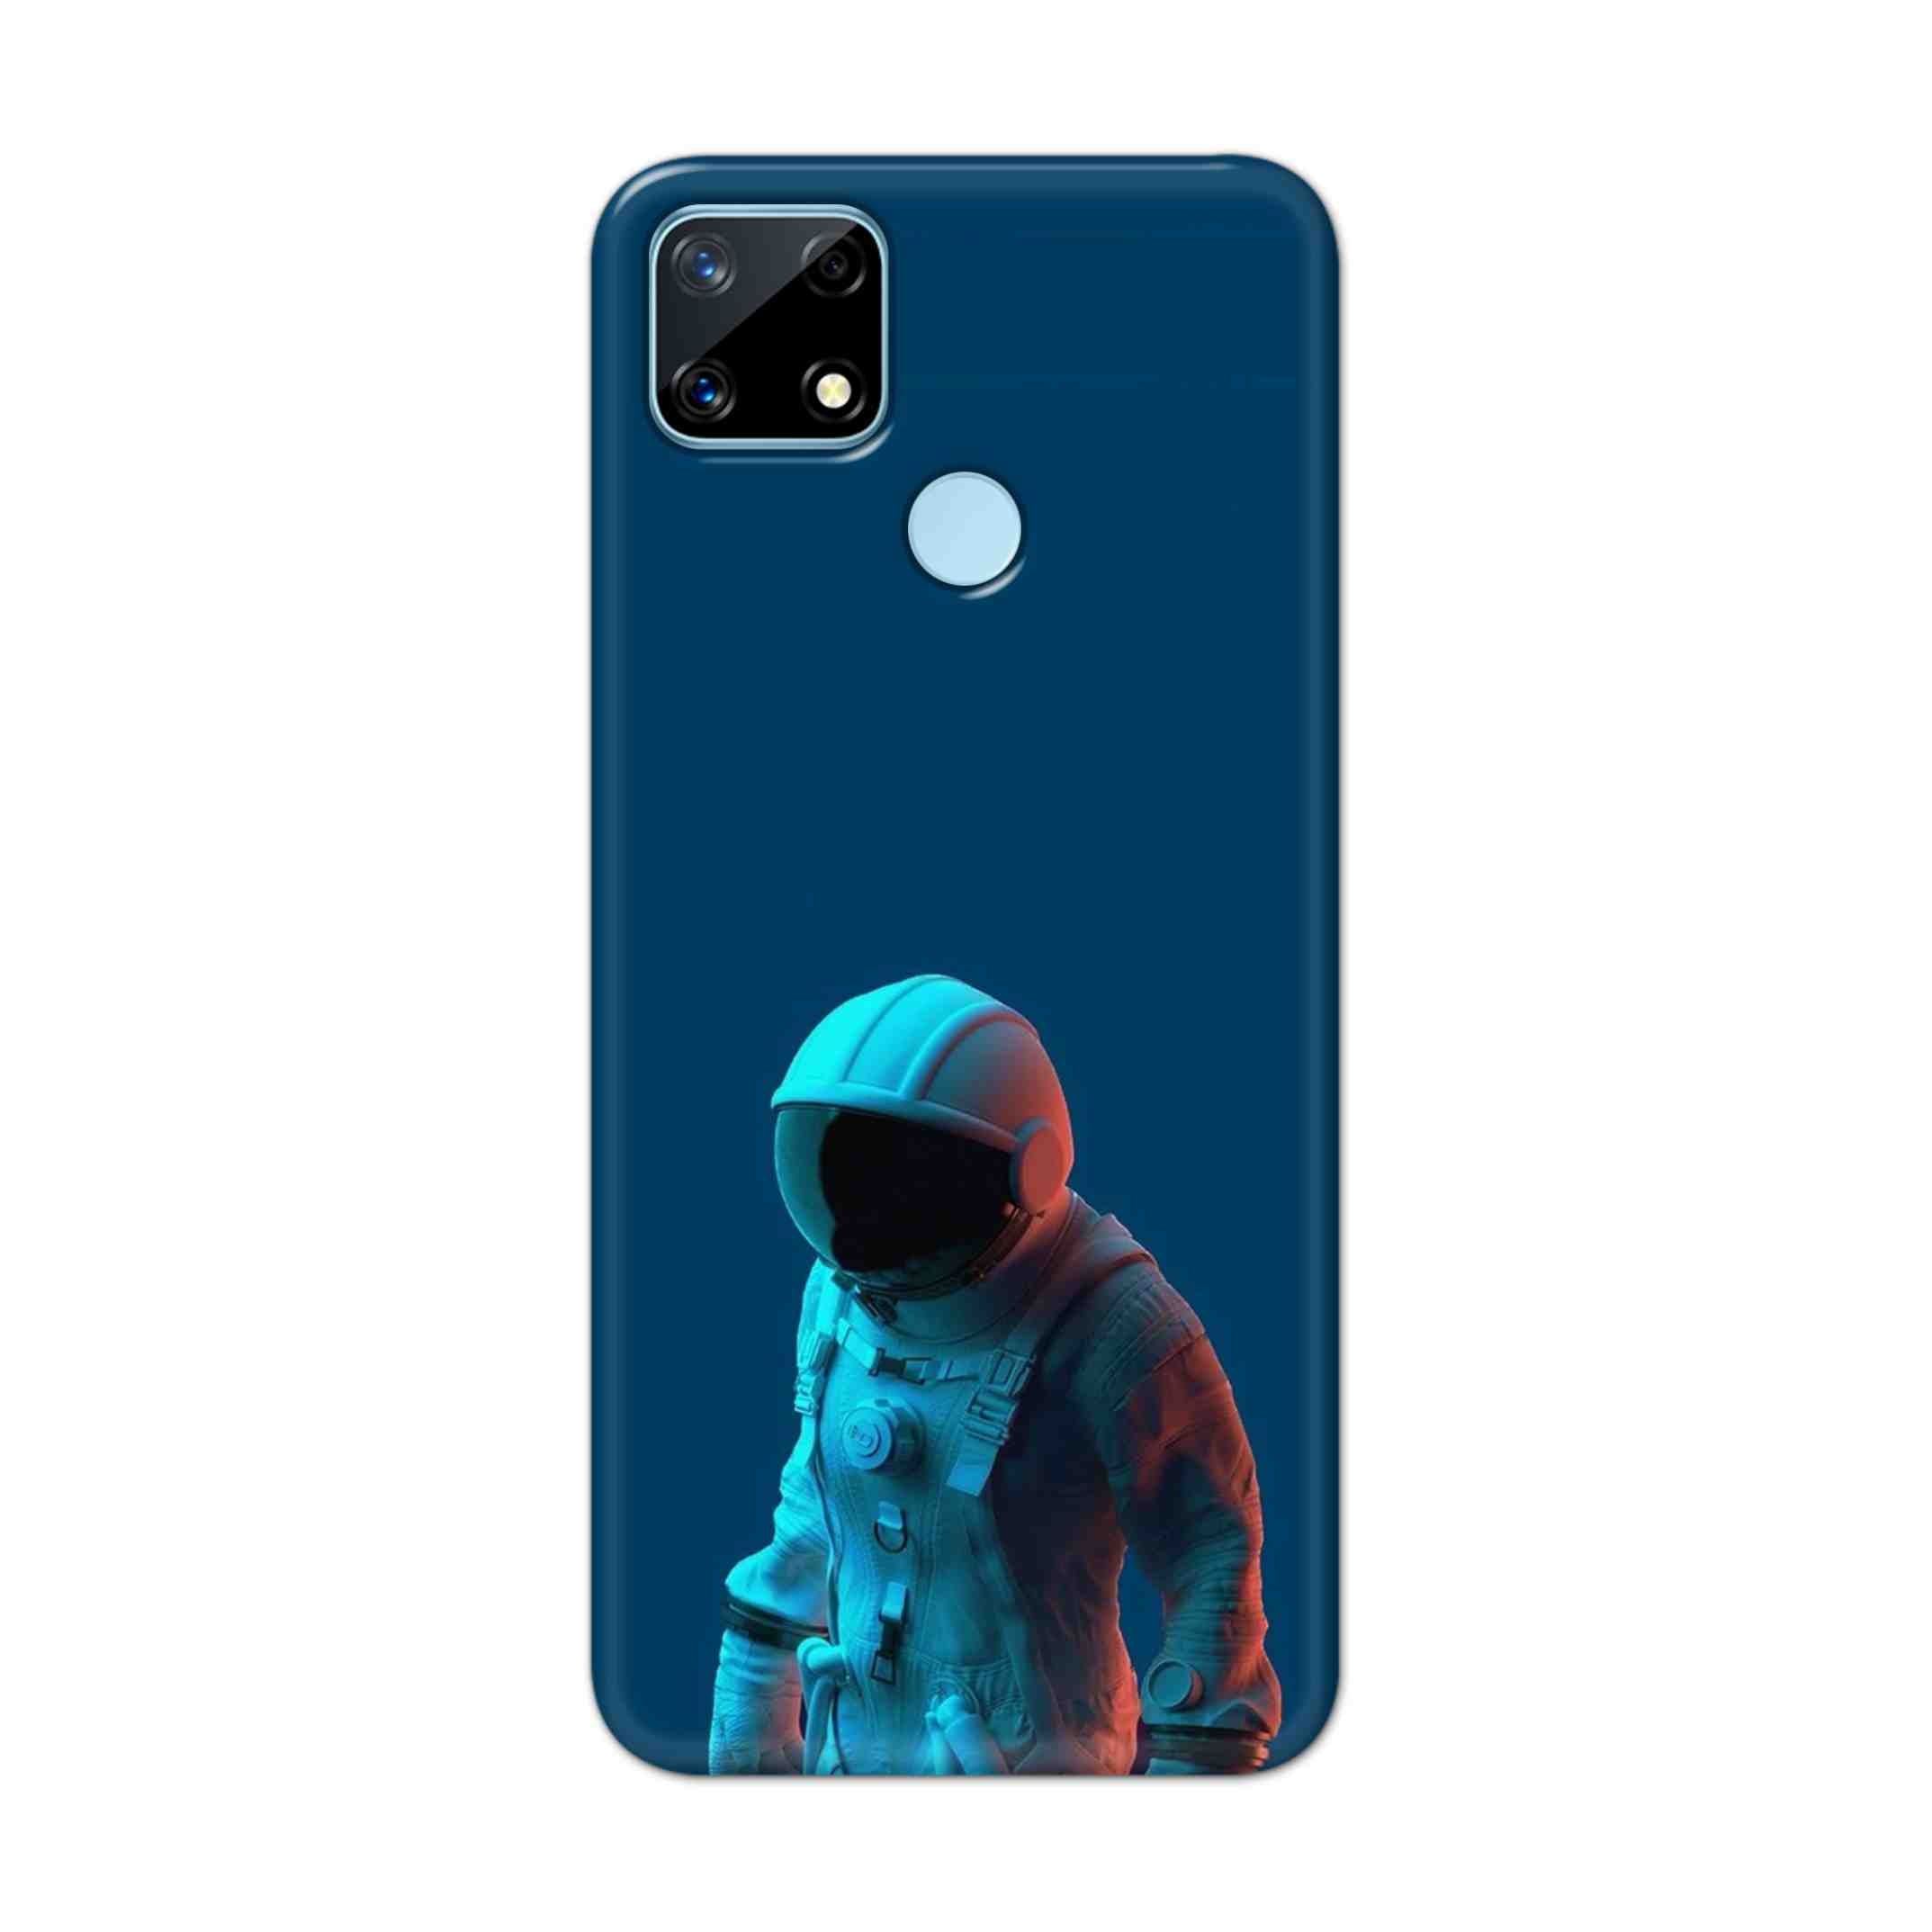 Buy Blue Astronaut Hard Back Mobile Phone Case Cover For Realme Narzo 20 Online